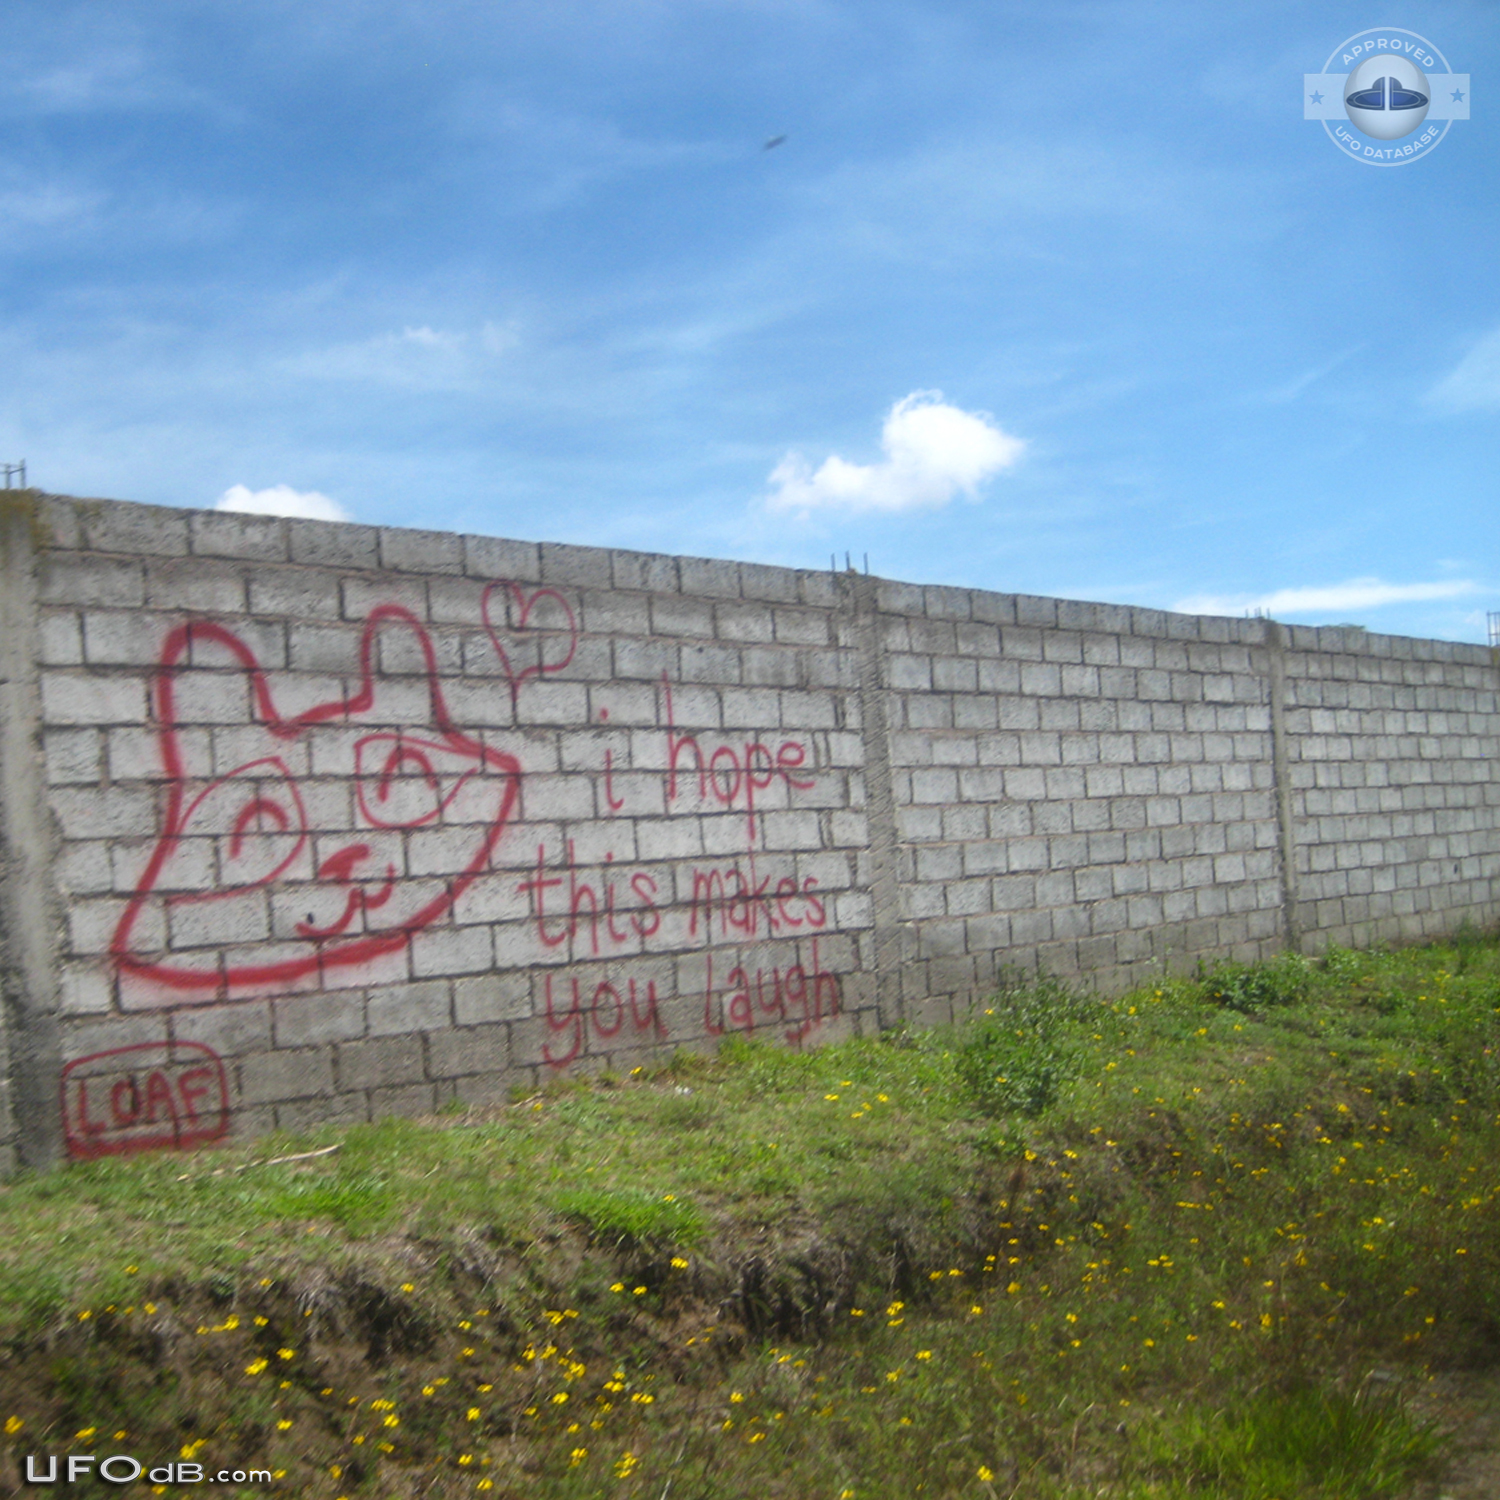 Picture of Graffiti on wall captures UFO in the sky in Cumbaya Ecuador UFO Picture #552-2